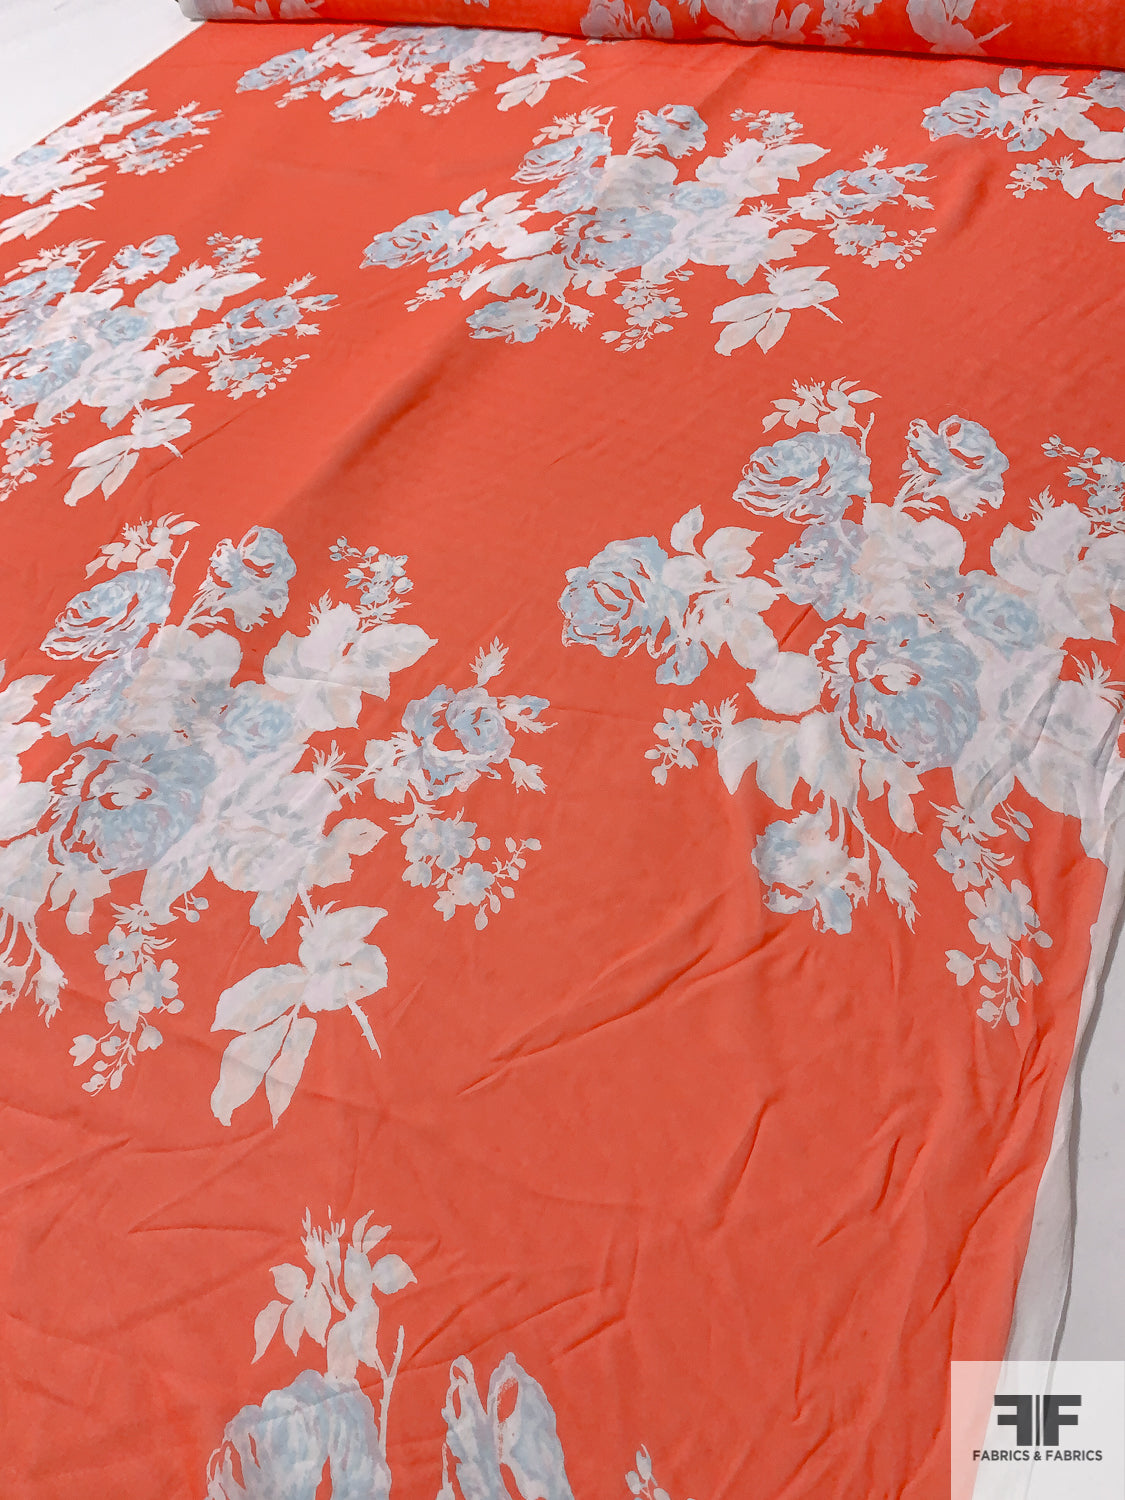 Large-Scale Floral Bouquets Printed Silk Chiffon - Coral Orange / Soft White / Sky Blue